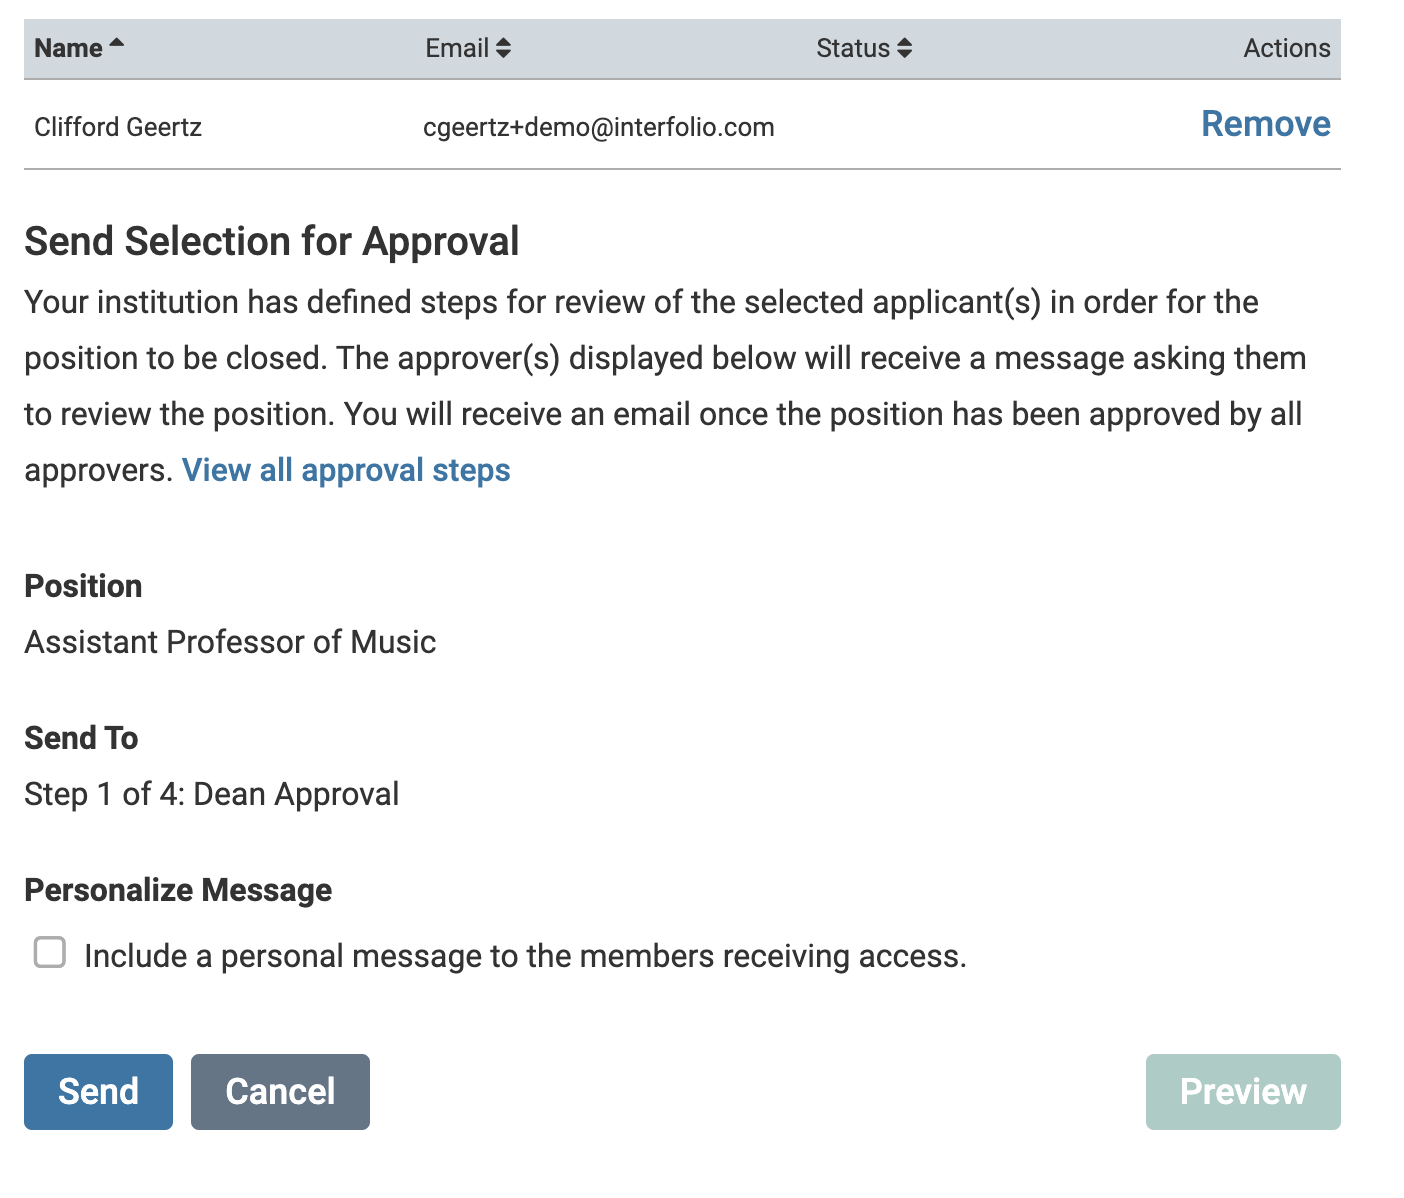 Send Selection for Approval section below the selected applicant name. View all approval steps button below, Include a personal message checkbox near the bottom, Send button at the bottom